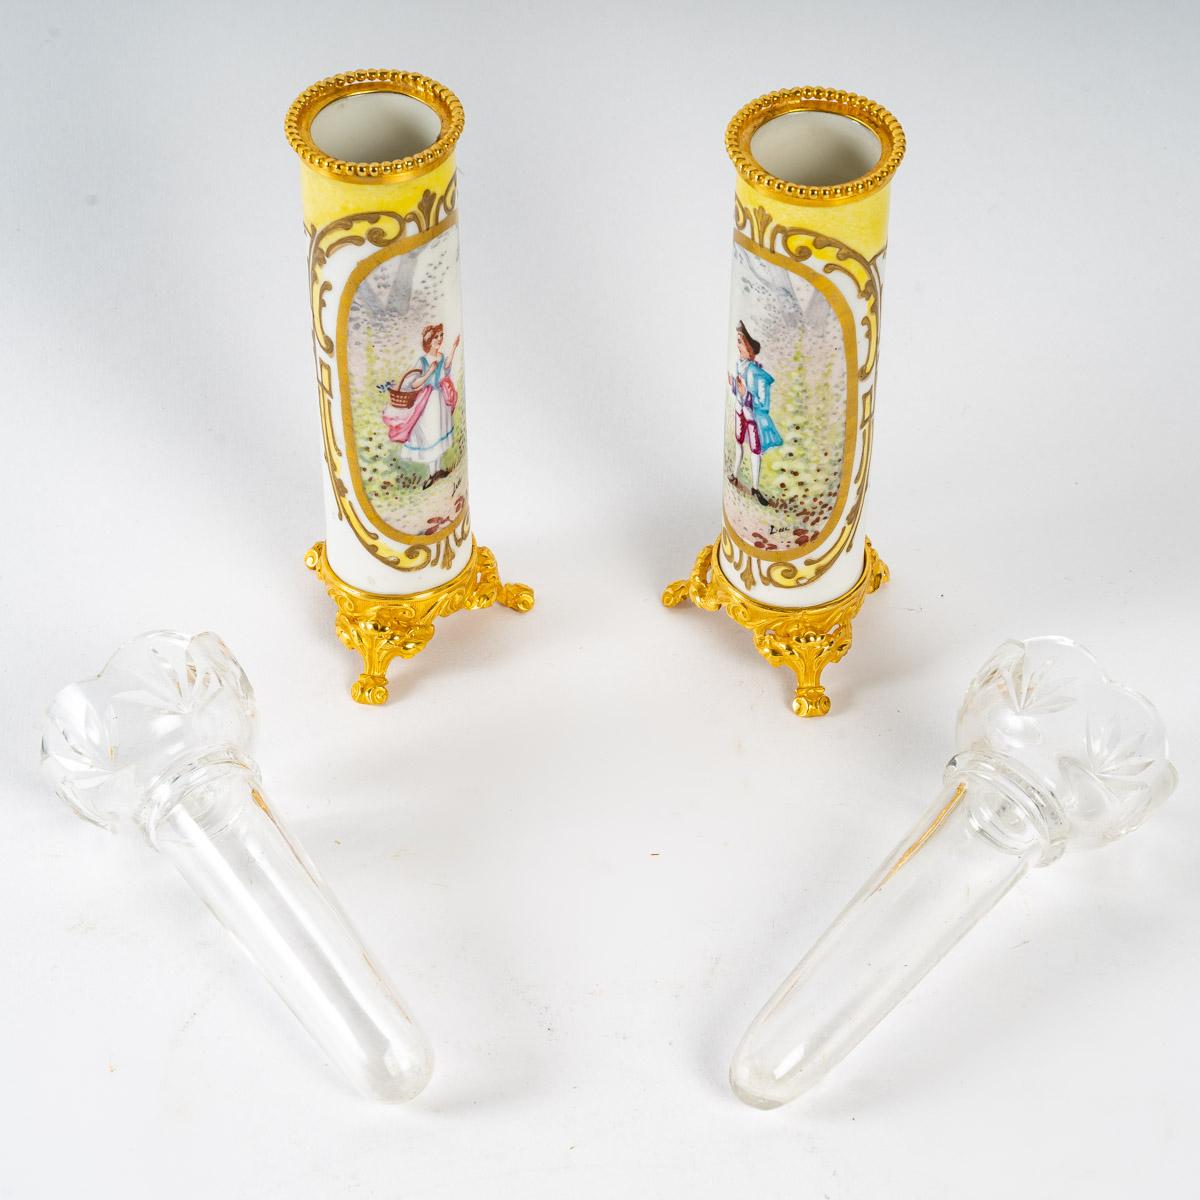 Pair of porcelain and gilt bronze soliflores, 19th century
A pair of porcelain and gilt bronze Soliflores with its crystal interior, 19th century, Napoleon III period.
Measures: H: 16.5 cm, d: 5 cm.
 